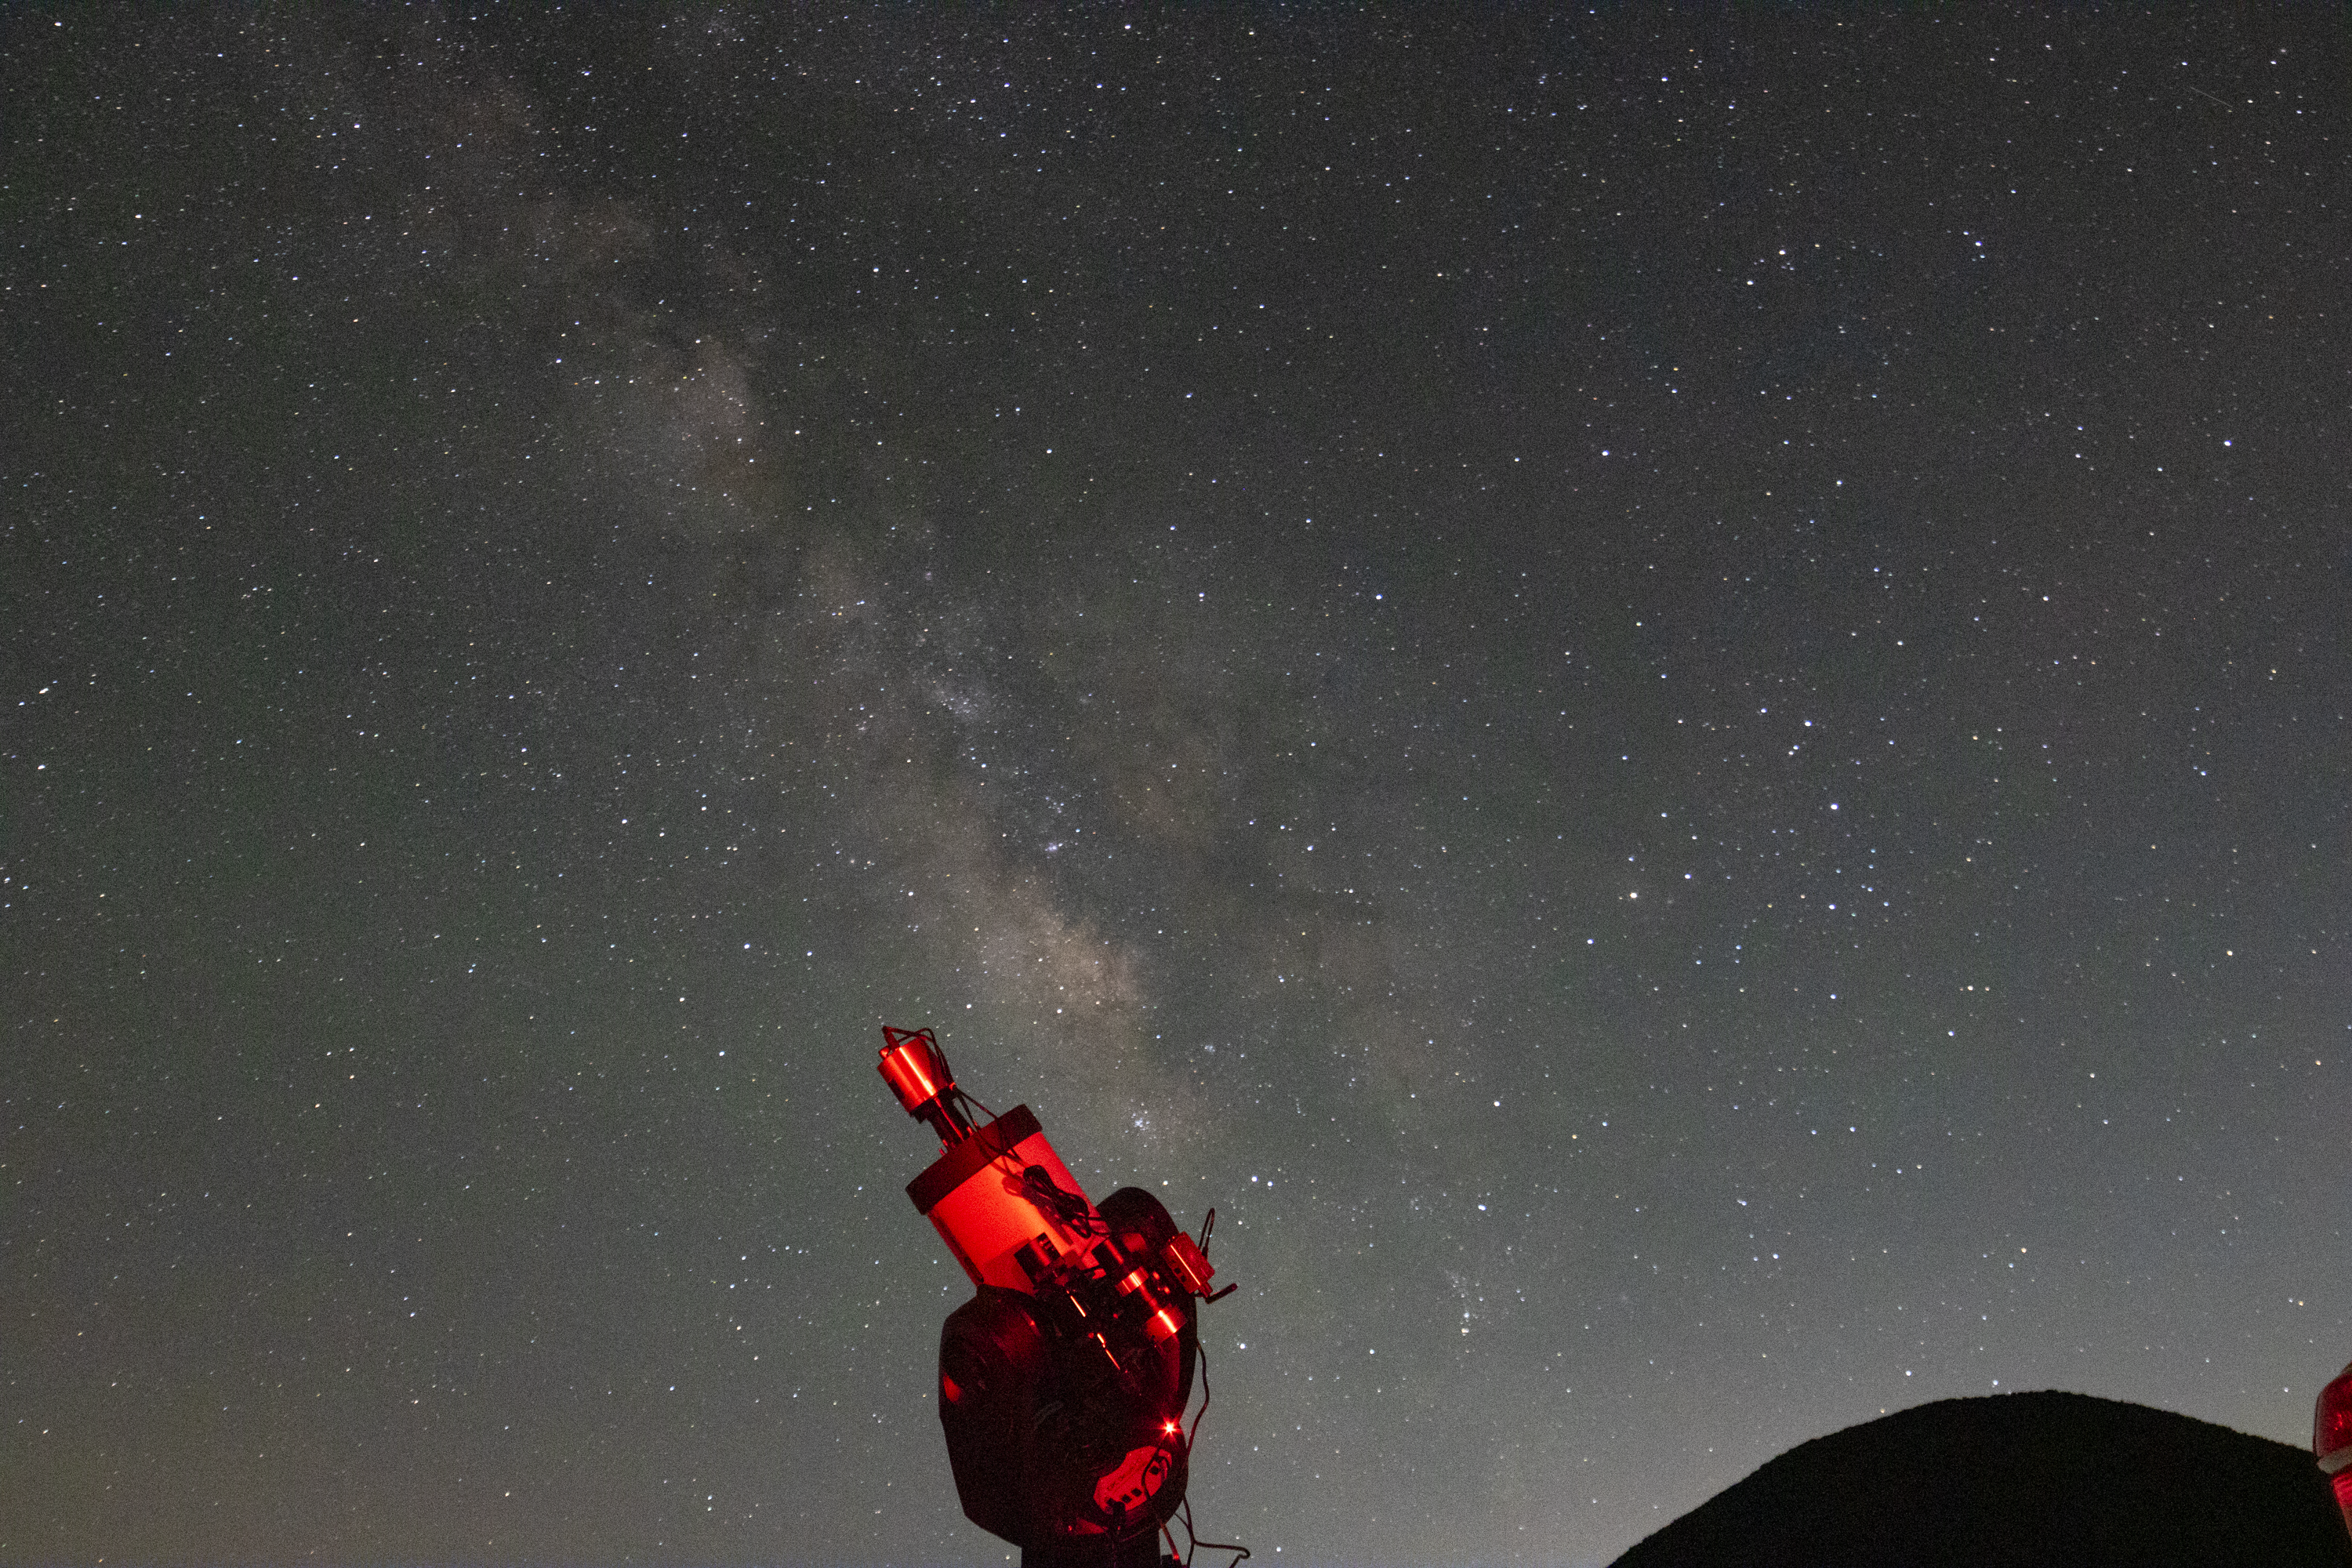 A single exposure image of Astroner'd advanced telescope with cameras in the foreground and the Milky Way galaxy in the background.